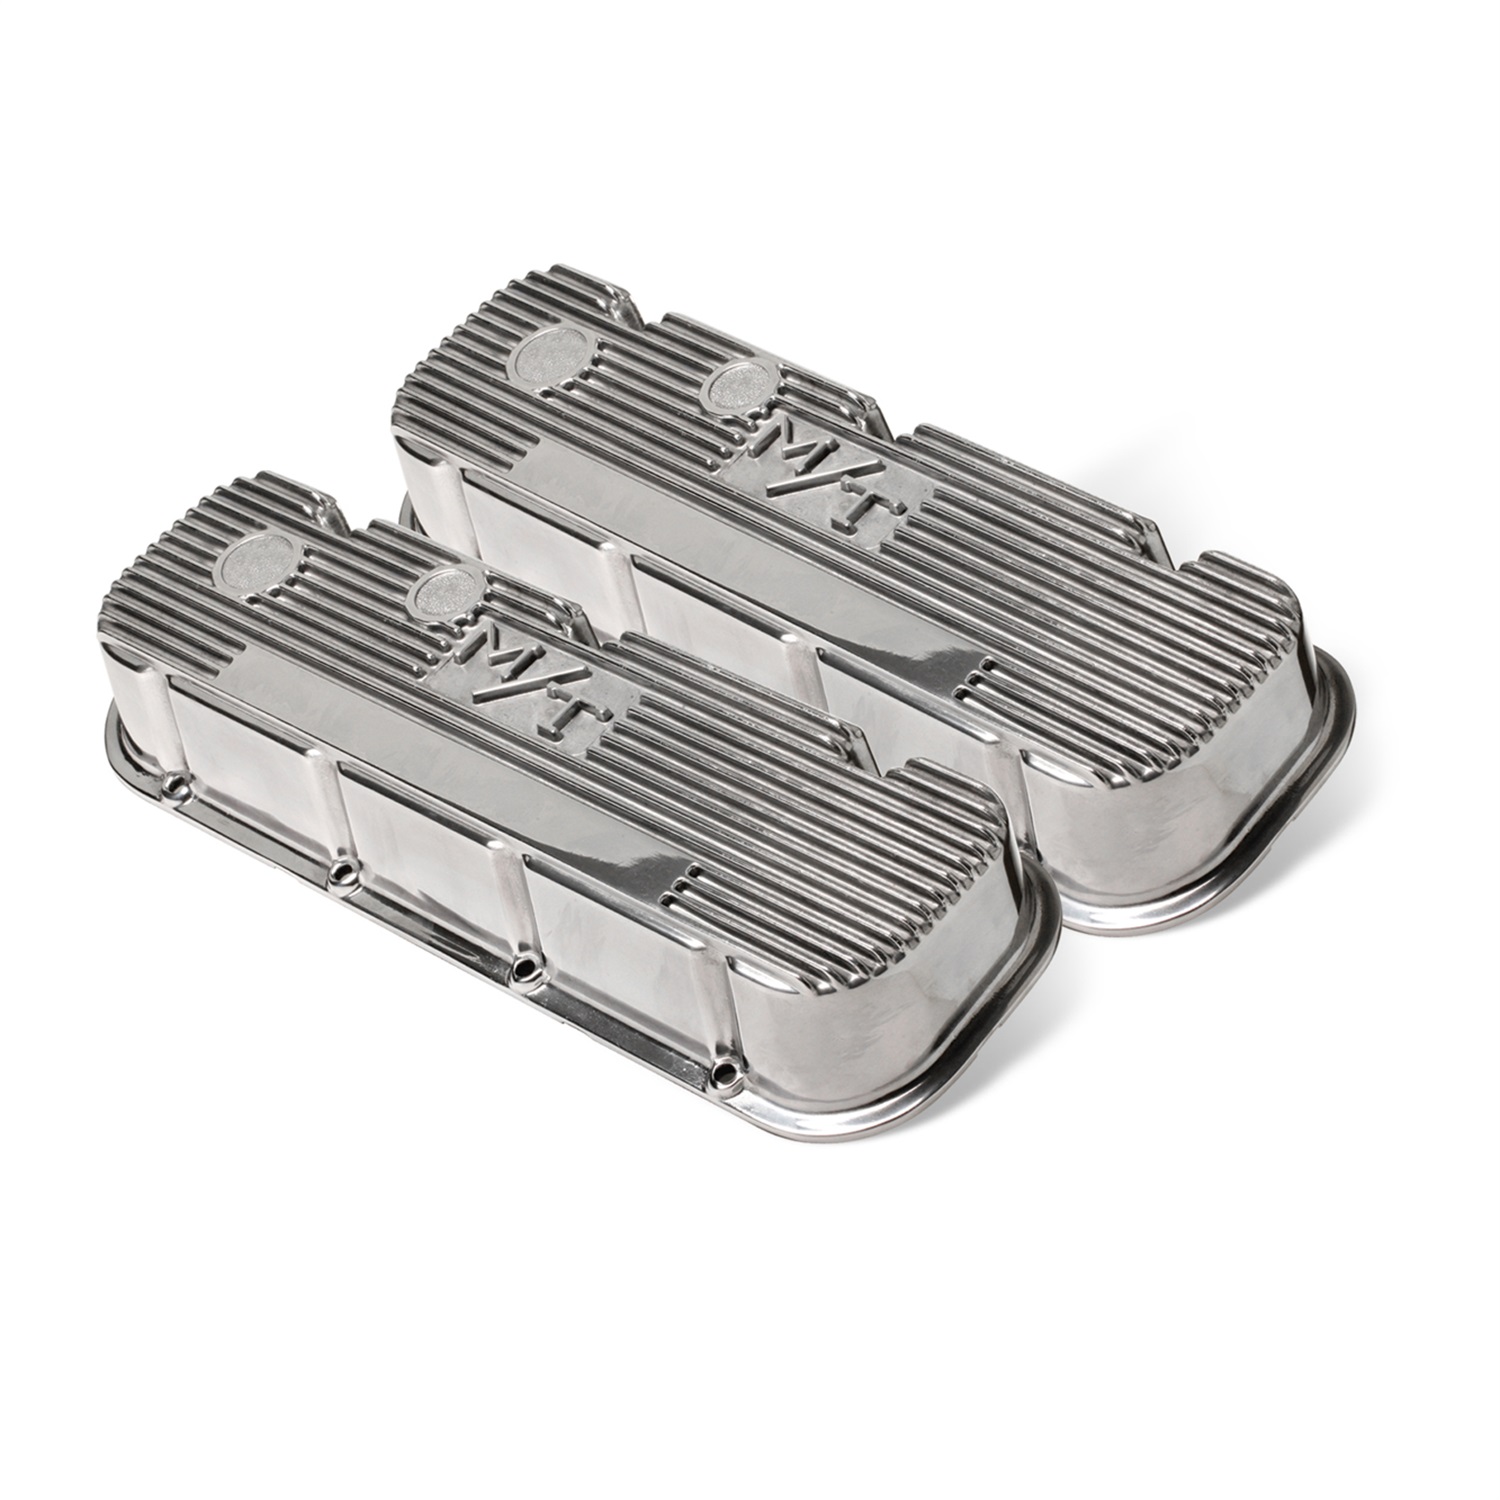 Holley Performance Holley Performance 241-84 M/T Retro Aluminum Valve Covers